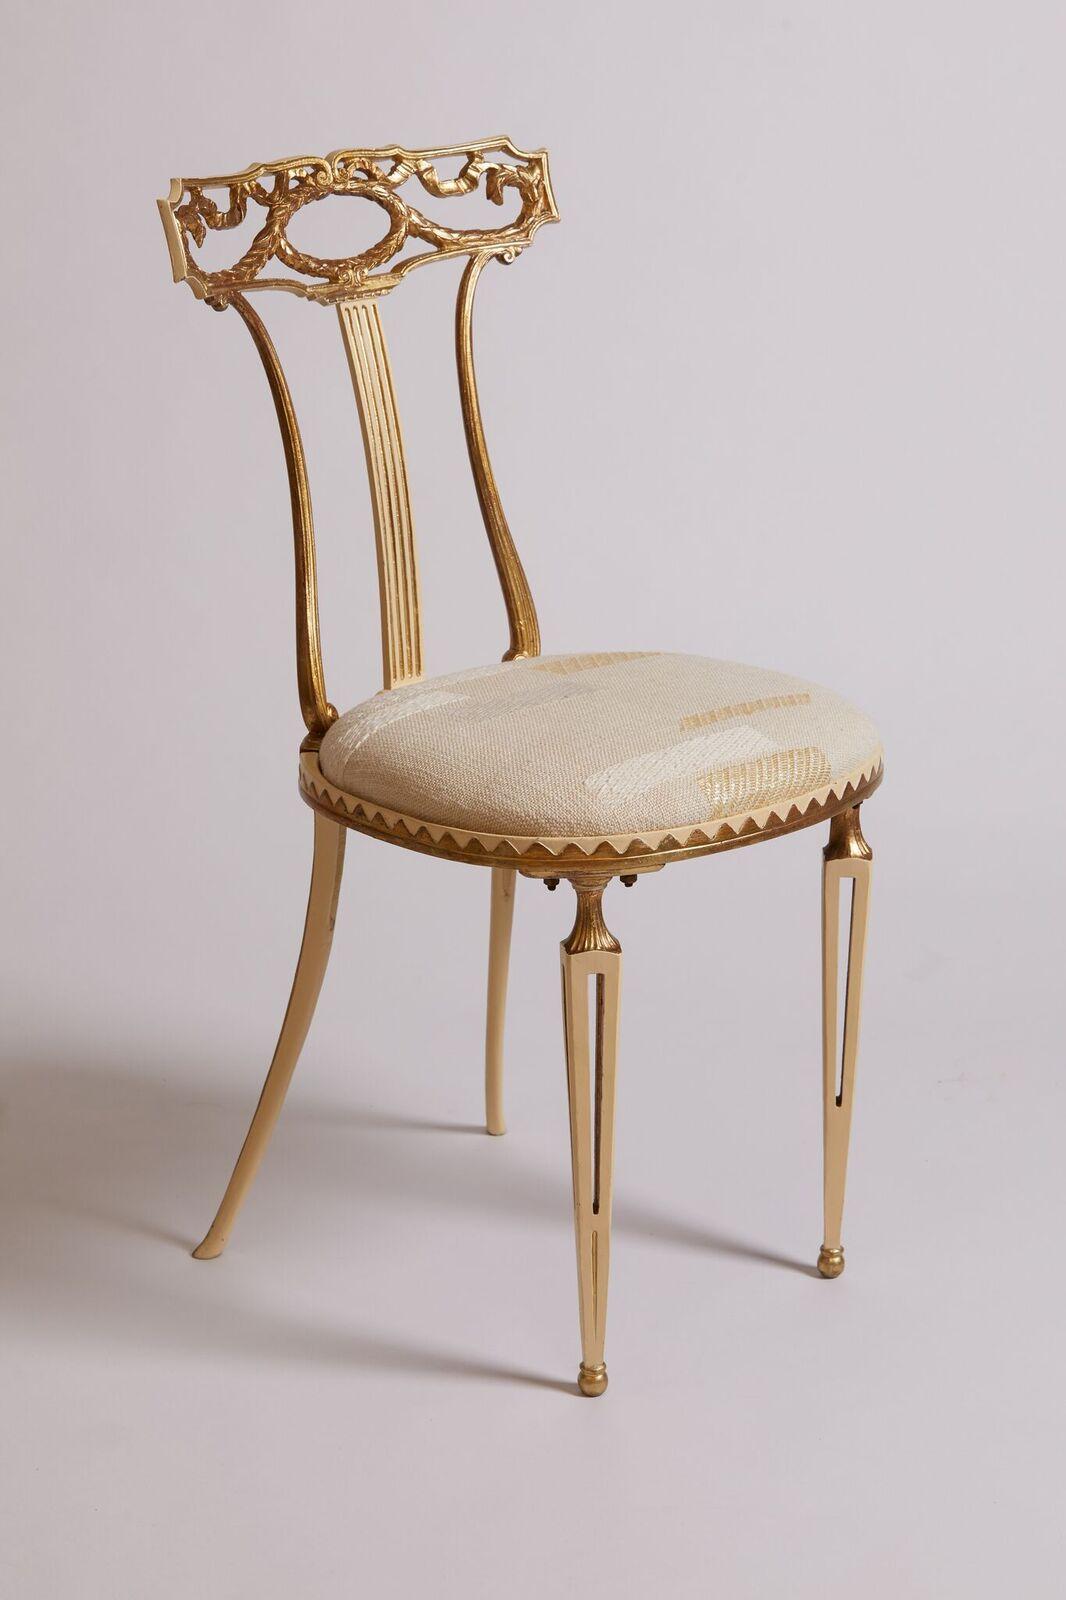 1980s Italian gold stamped metal and cream reupholstered and restored Palladio neoclassical chair.